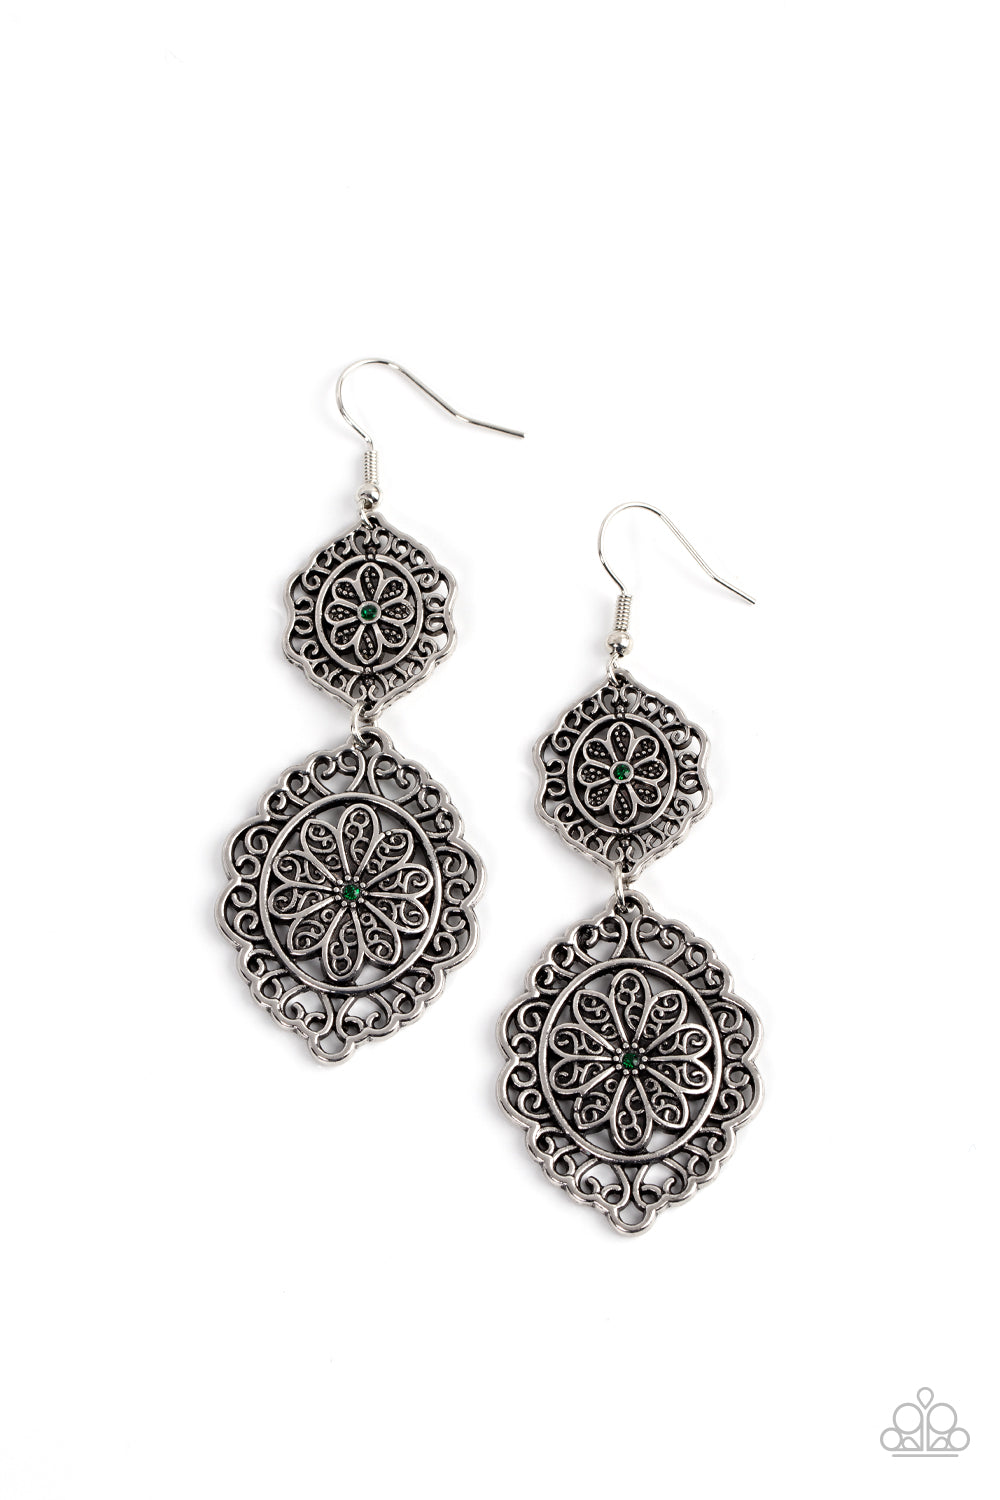 Floral Favorite - Green and Silver Earrings - Paparazzi Accessories - Dotted with dainty green rhinestone centers, a pair of filigree filled silver flowers bloom inside scalloped silver frames that delicately link into a whimsical floral lure.